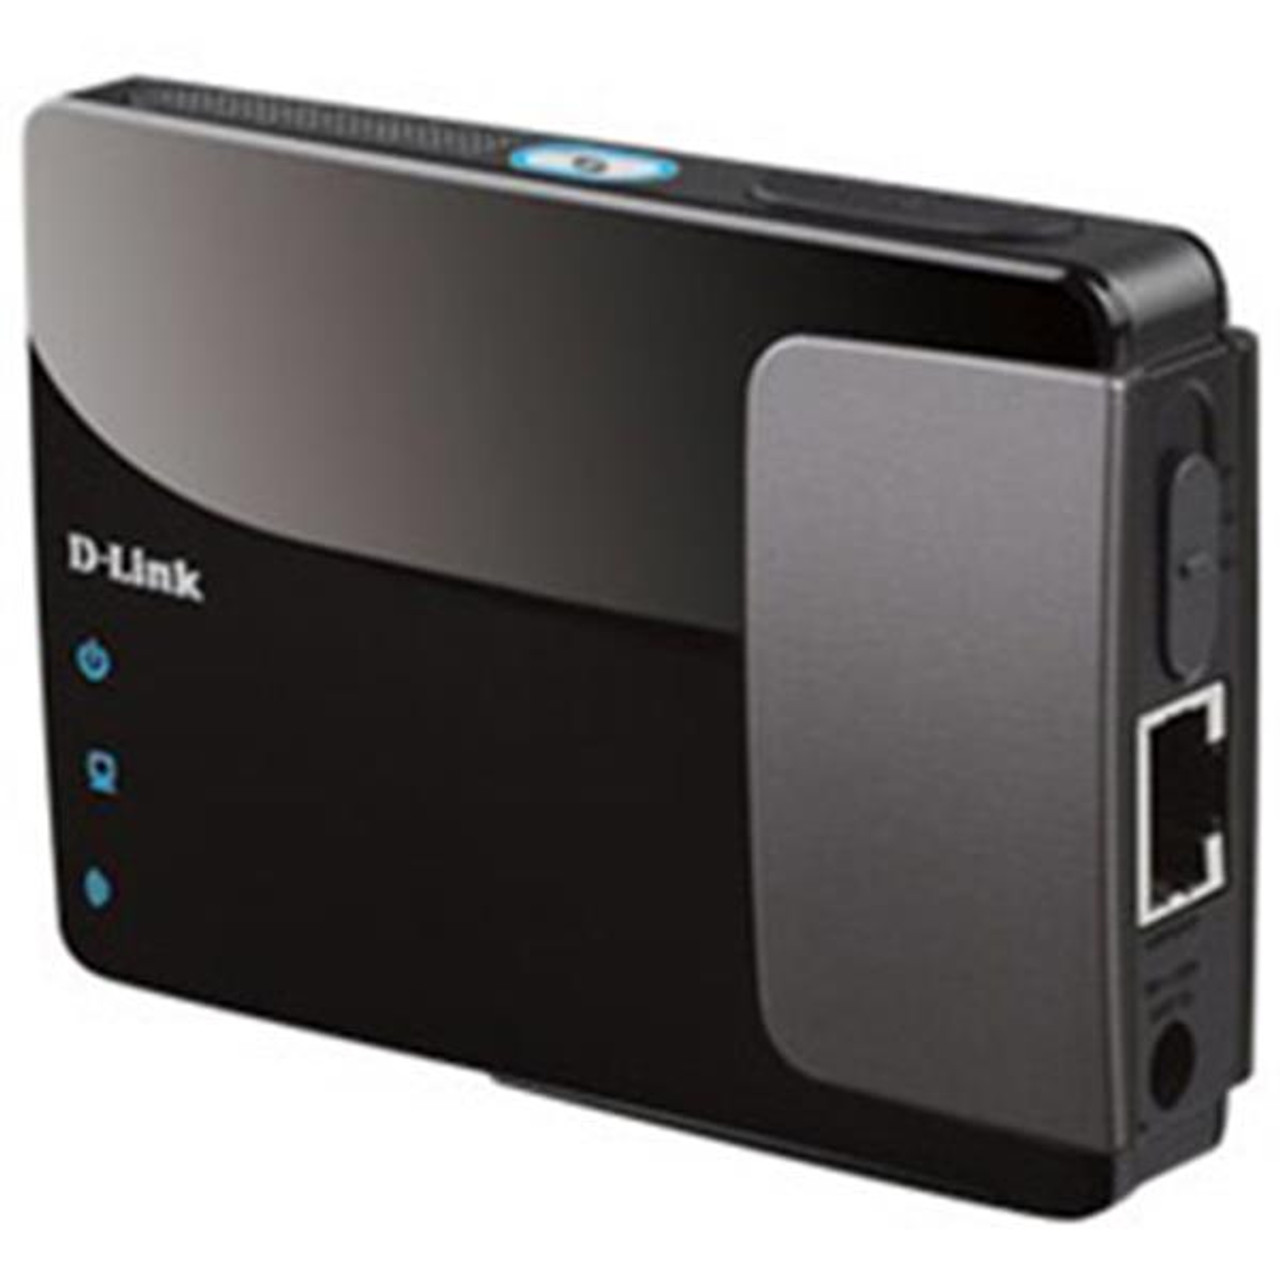 DC7685 D-Link Wireless-n Pocket Router & Access Point Wireless N150 3-in-1 Wi-fi Device (Refurbished)